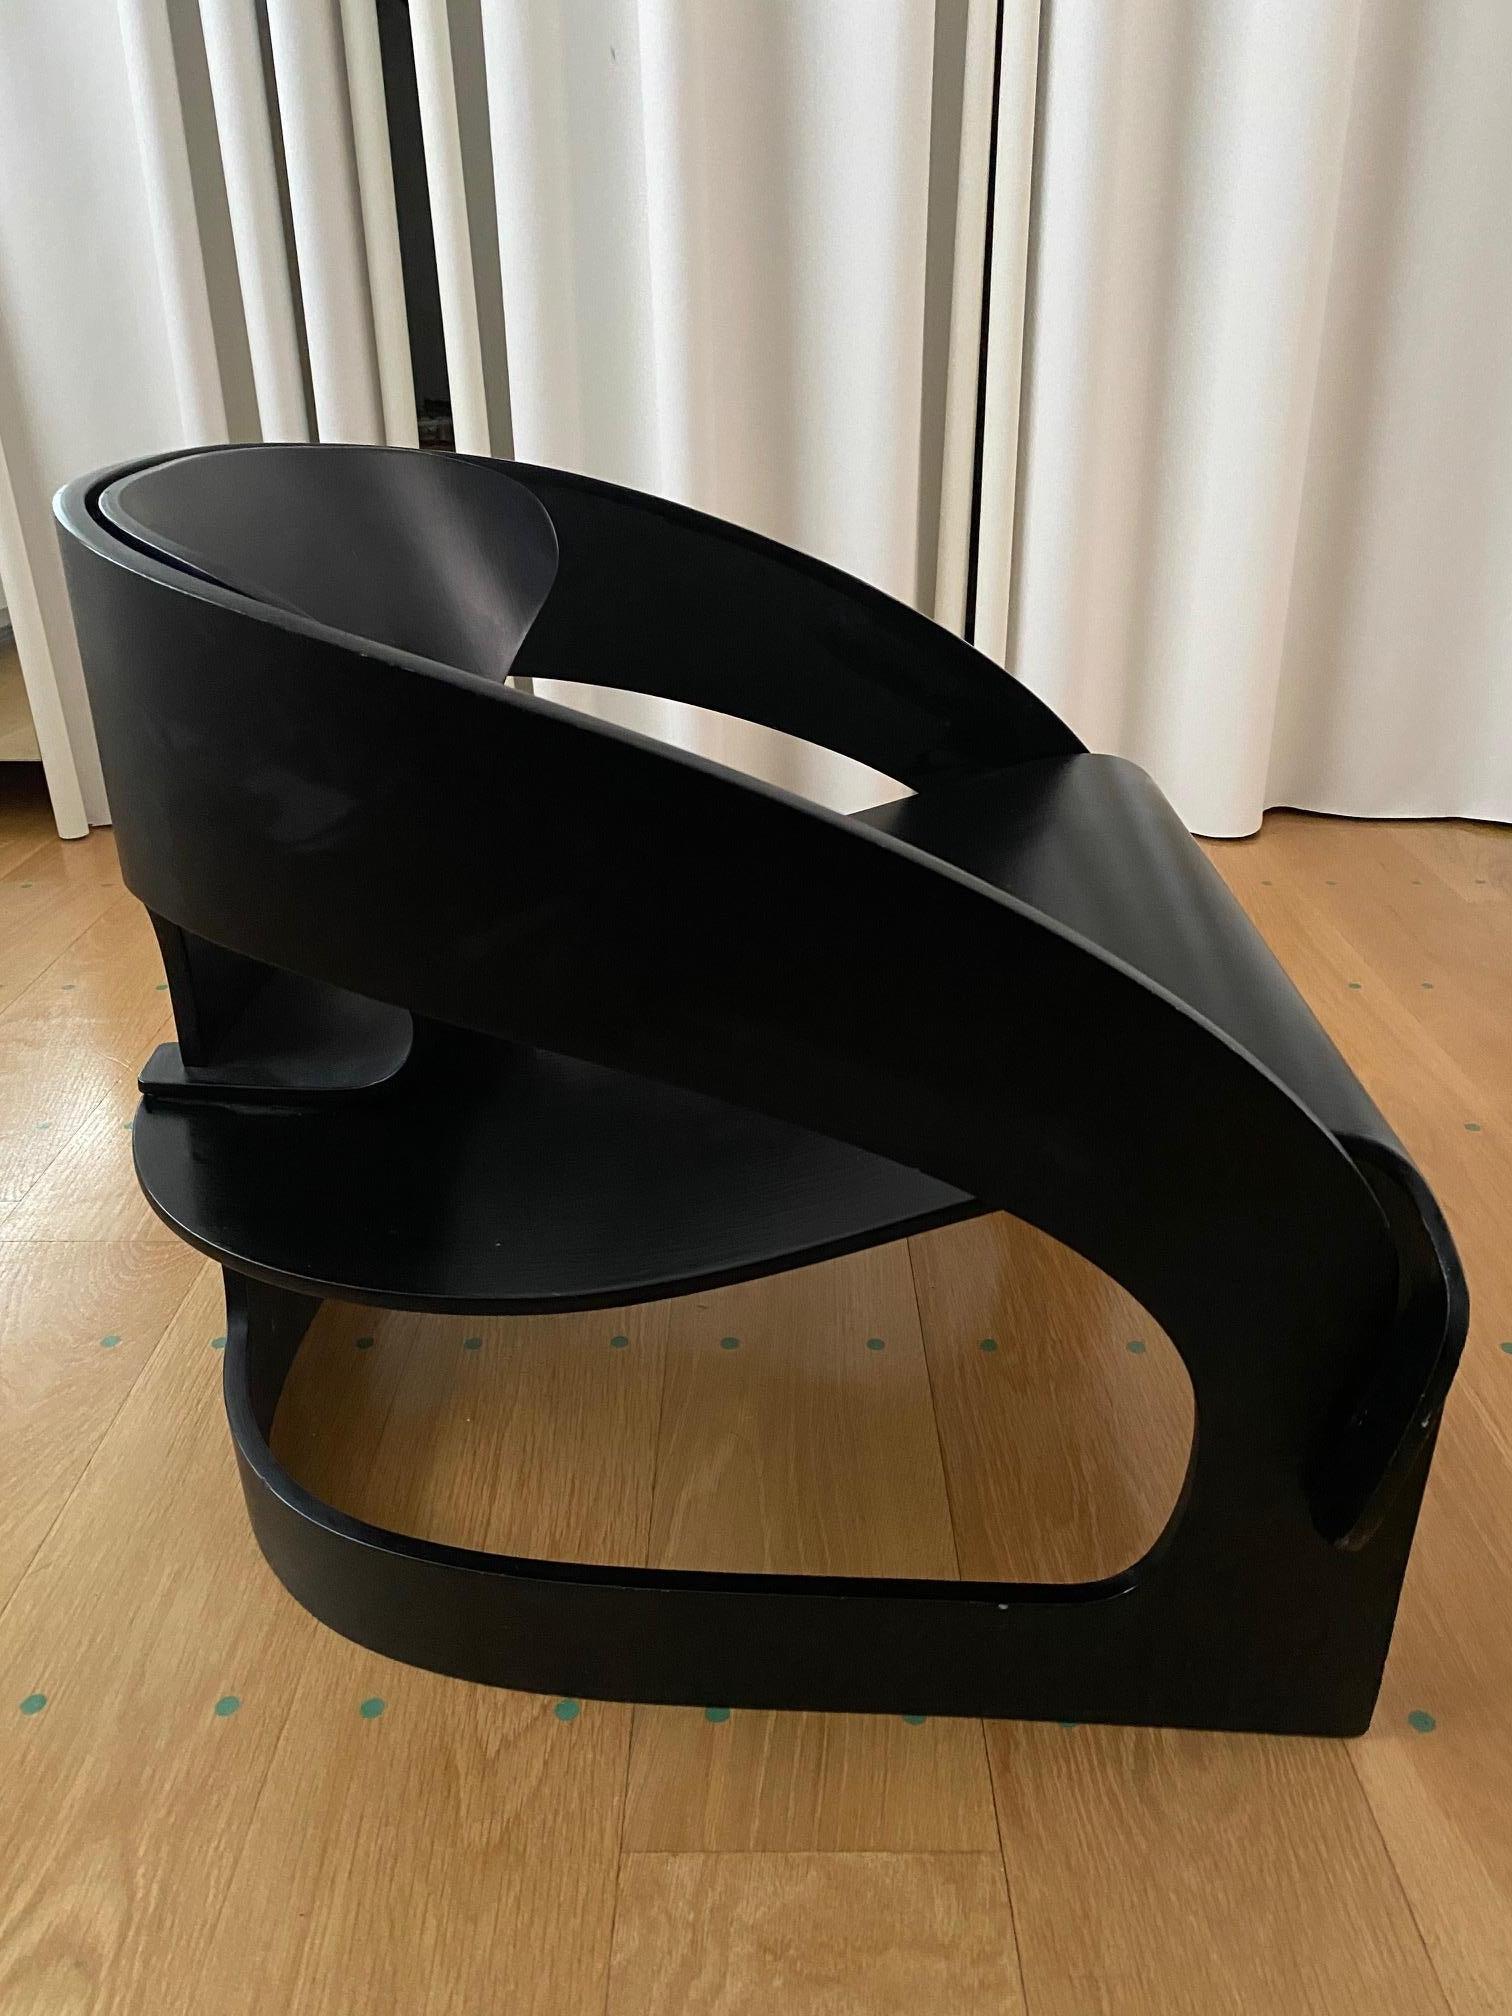 Mid-20th Century Joe Colombo Plywood Black 4801 Lounge Chair, Kartell, 1960s For Sale